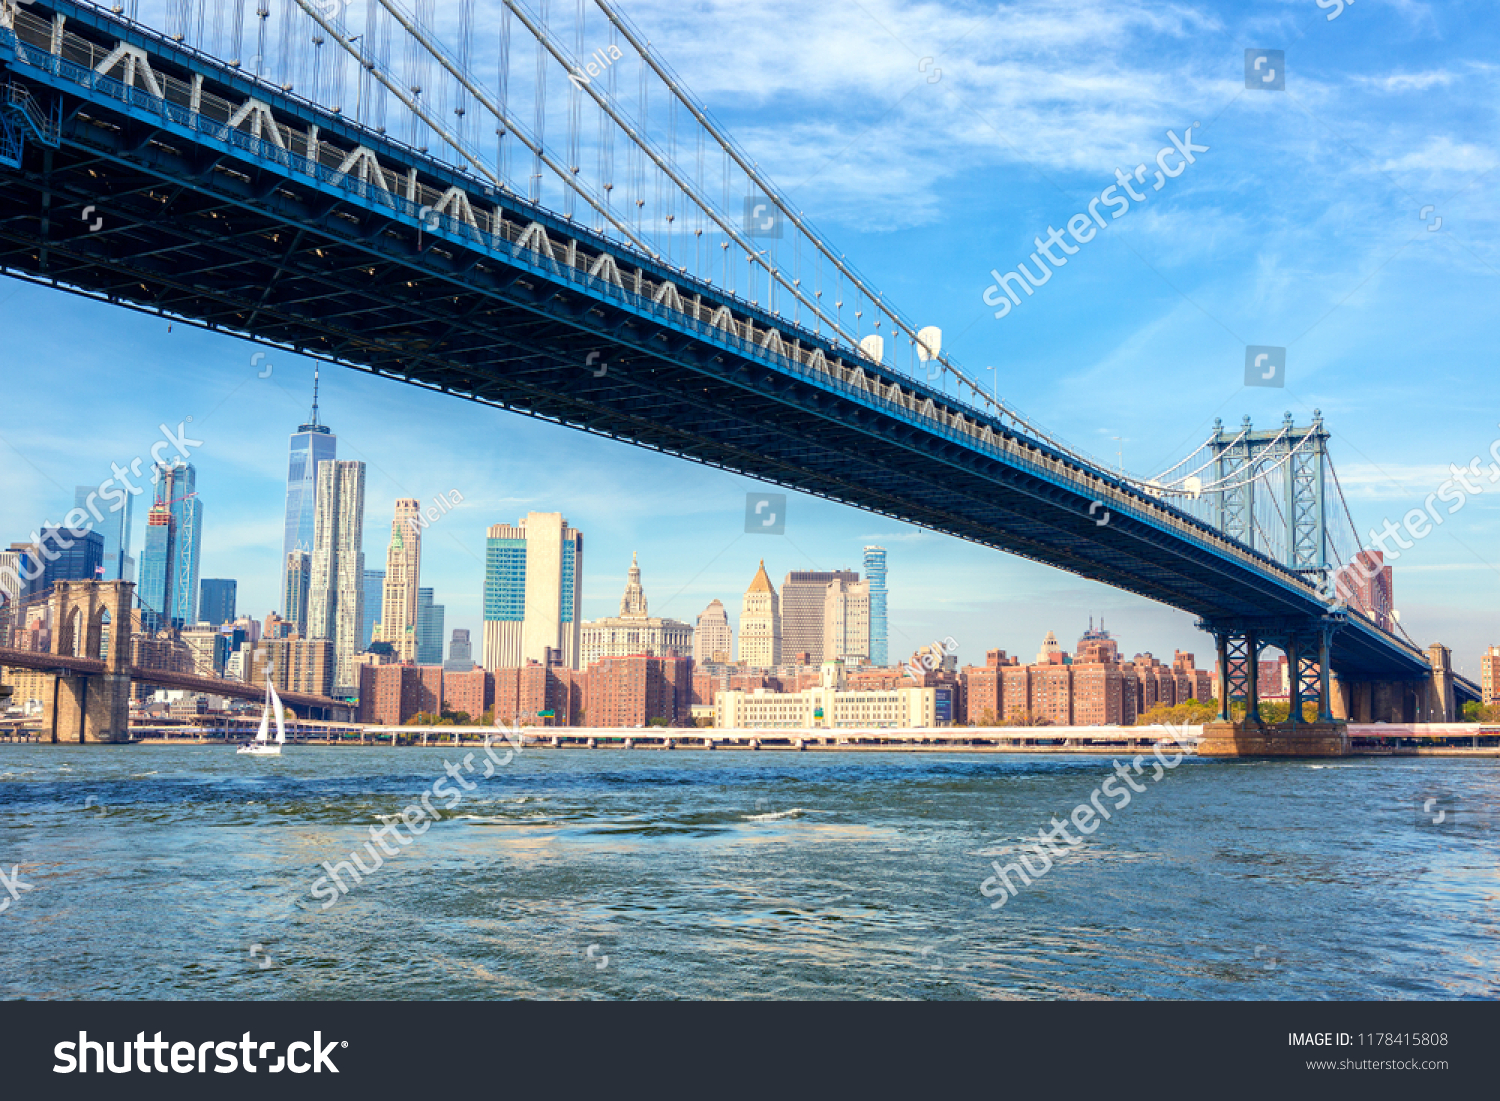 The Manhattan Bridge with  Manhattan in the background at the day-time, New York City, United States. #1178415808